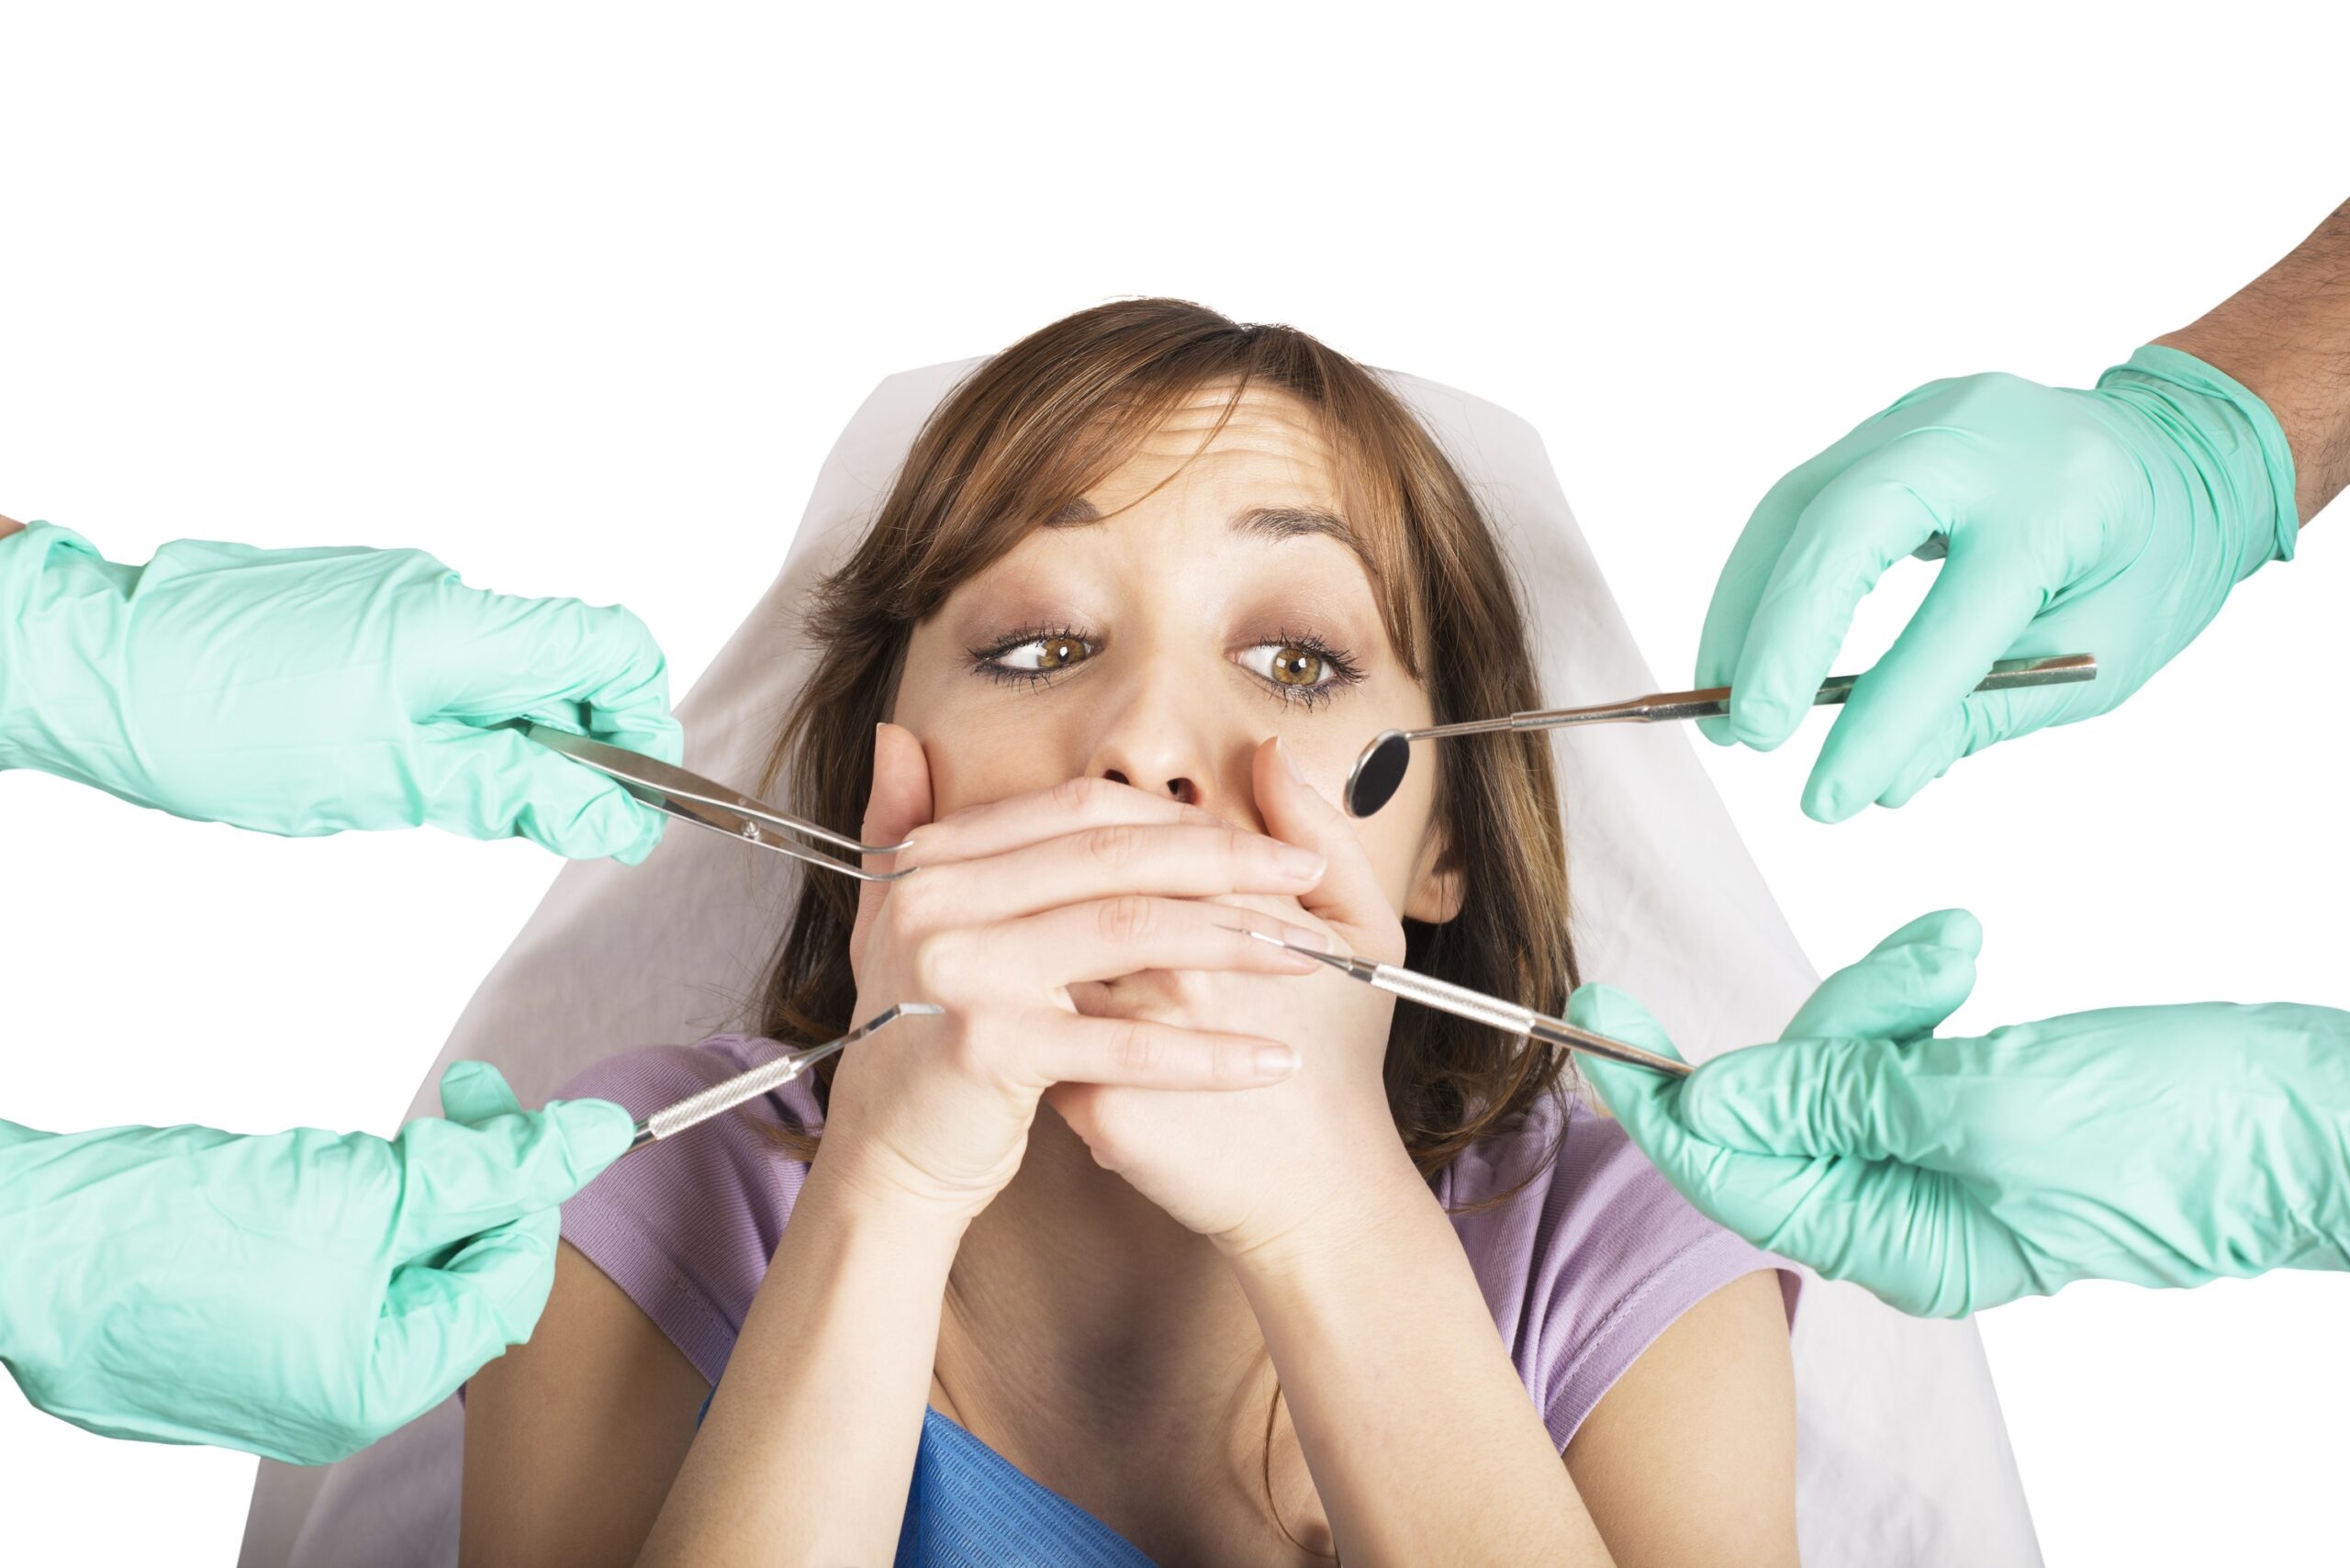 Fear of Root Canal Treatment